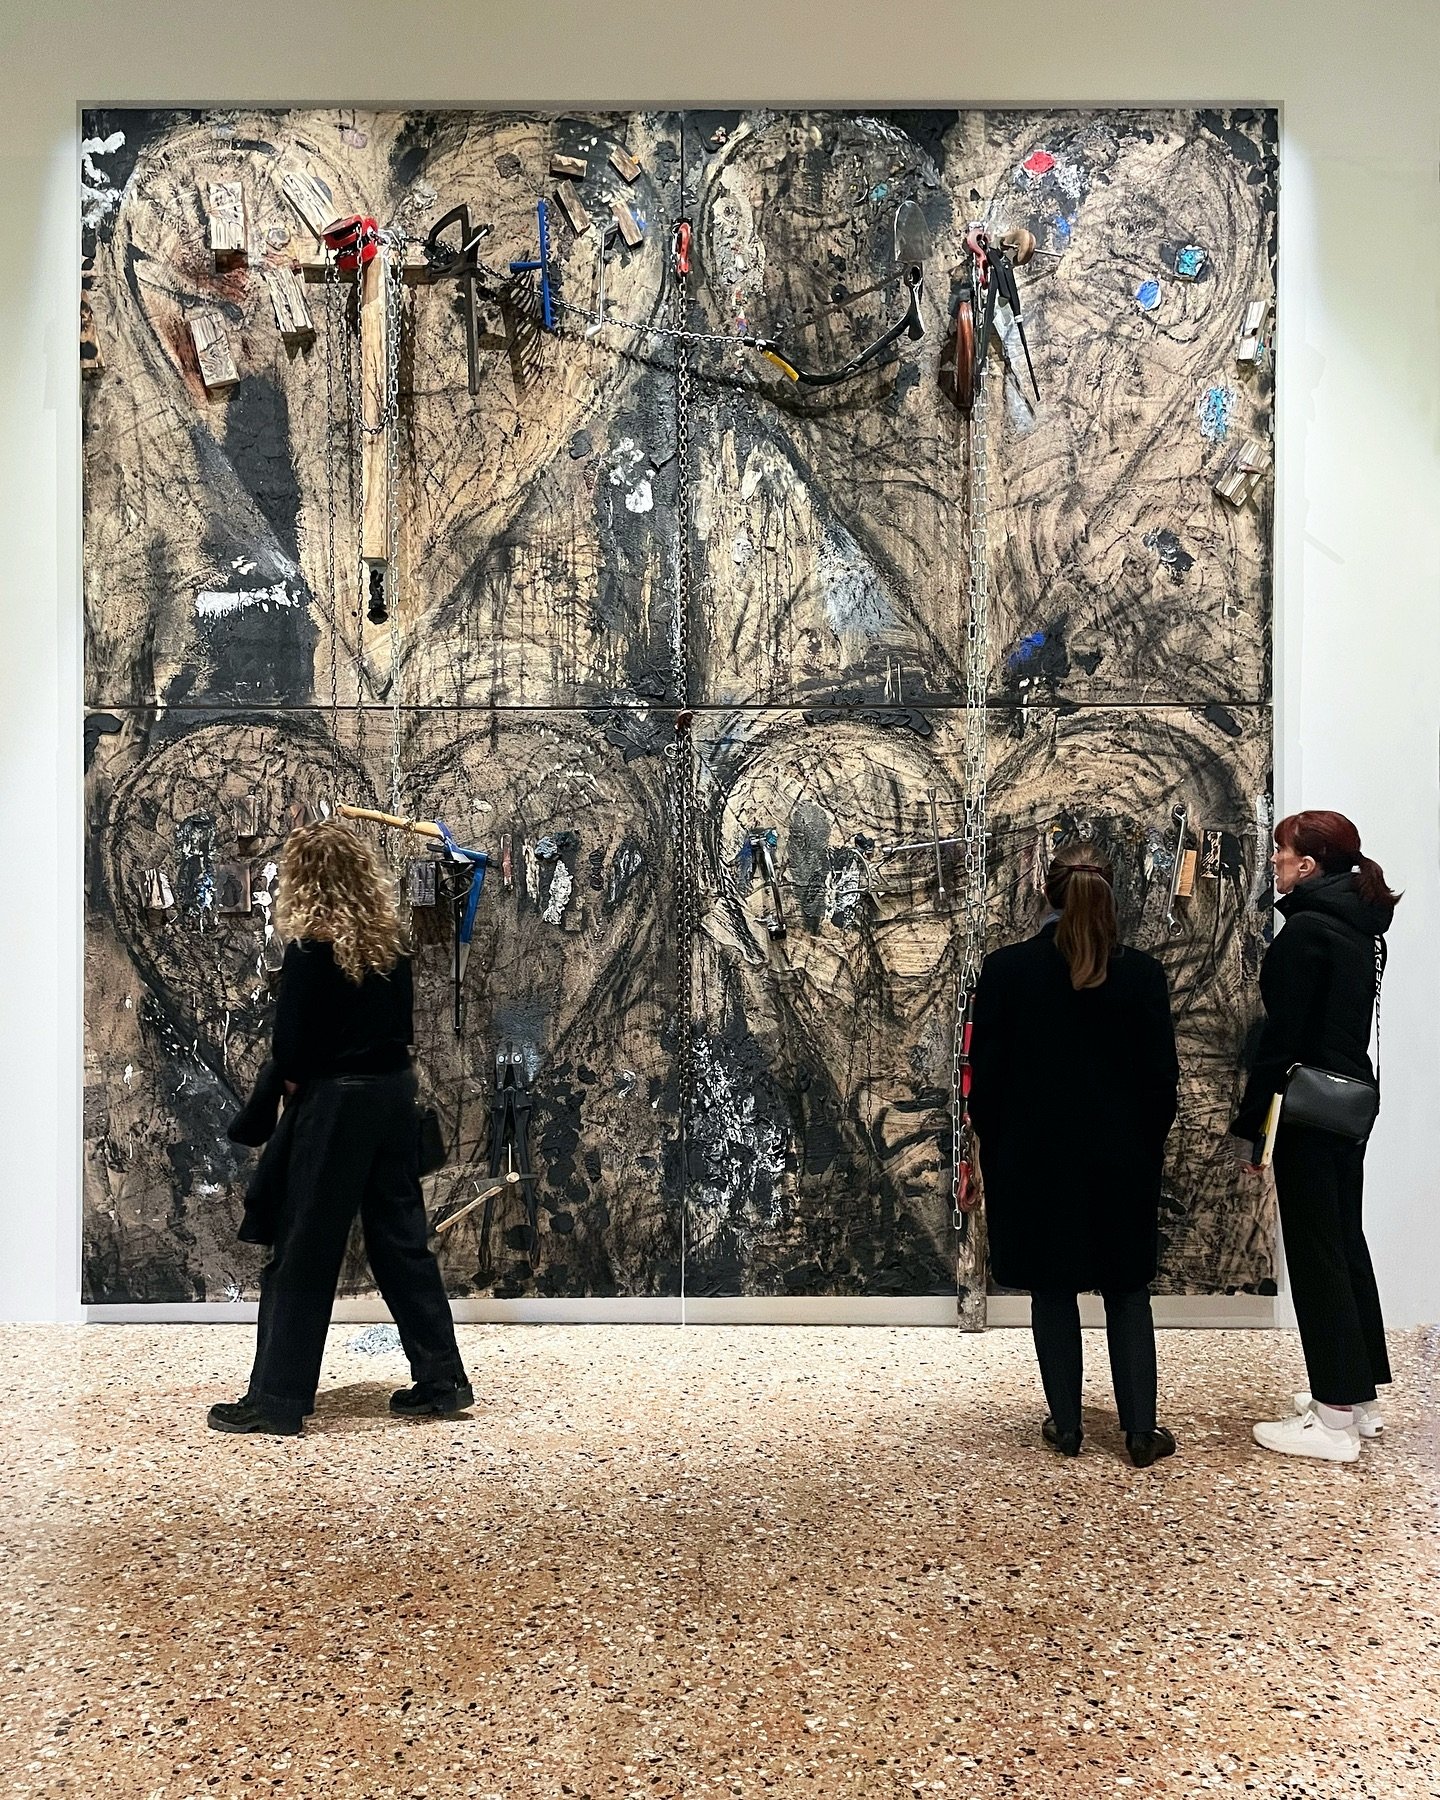 📣 Private tours of Jim Dine: Dog on the Forge at the Palazzo Rocca are now available courtesy of Art Asset Management Group. 📣

Book a private, one-on-one walkthrough or schedule an exclusive group tour.

DETAILS

🔎 Guide: Xiliary Twil, Art Asset 